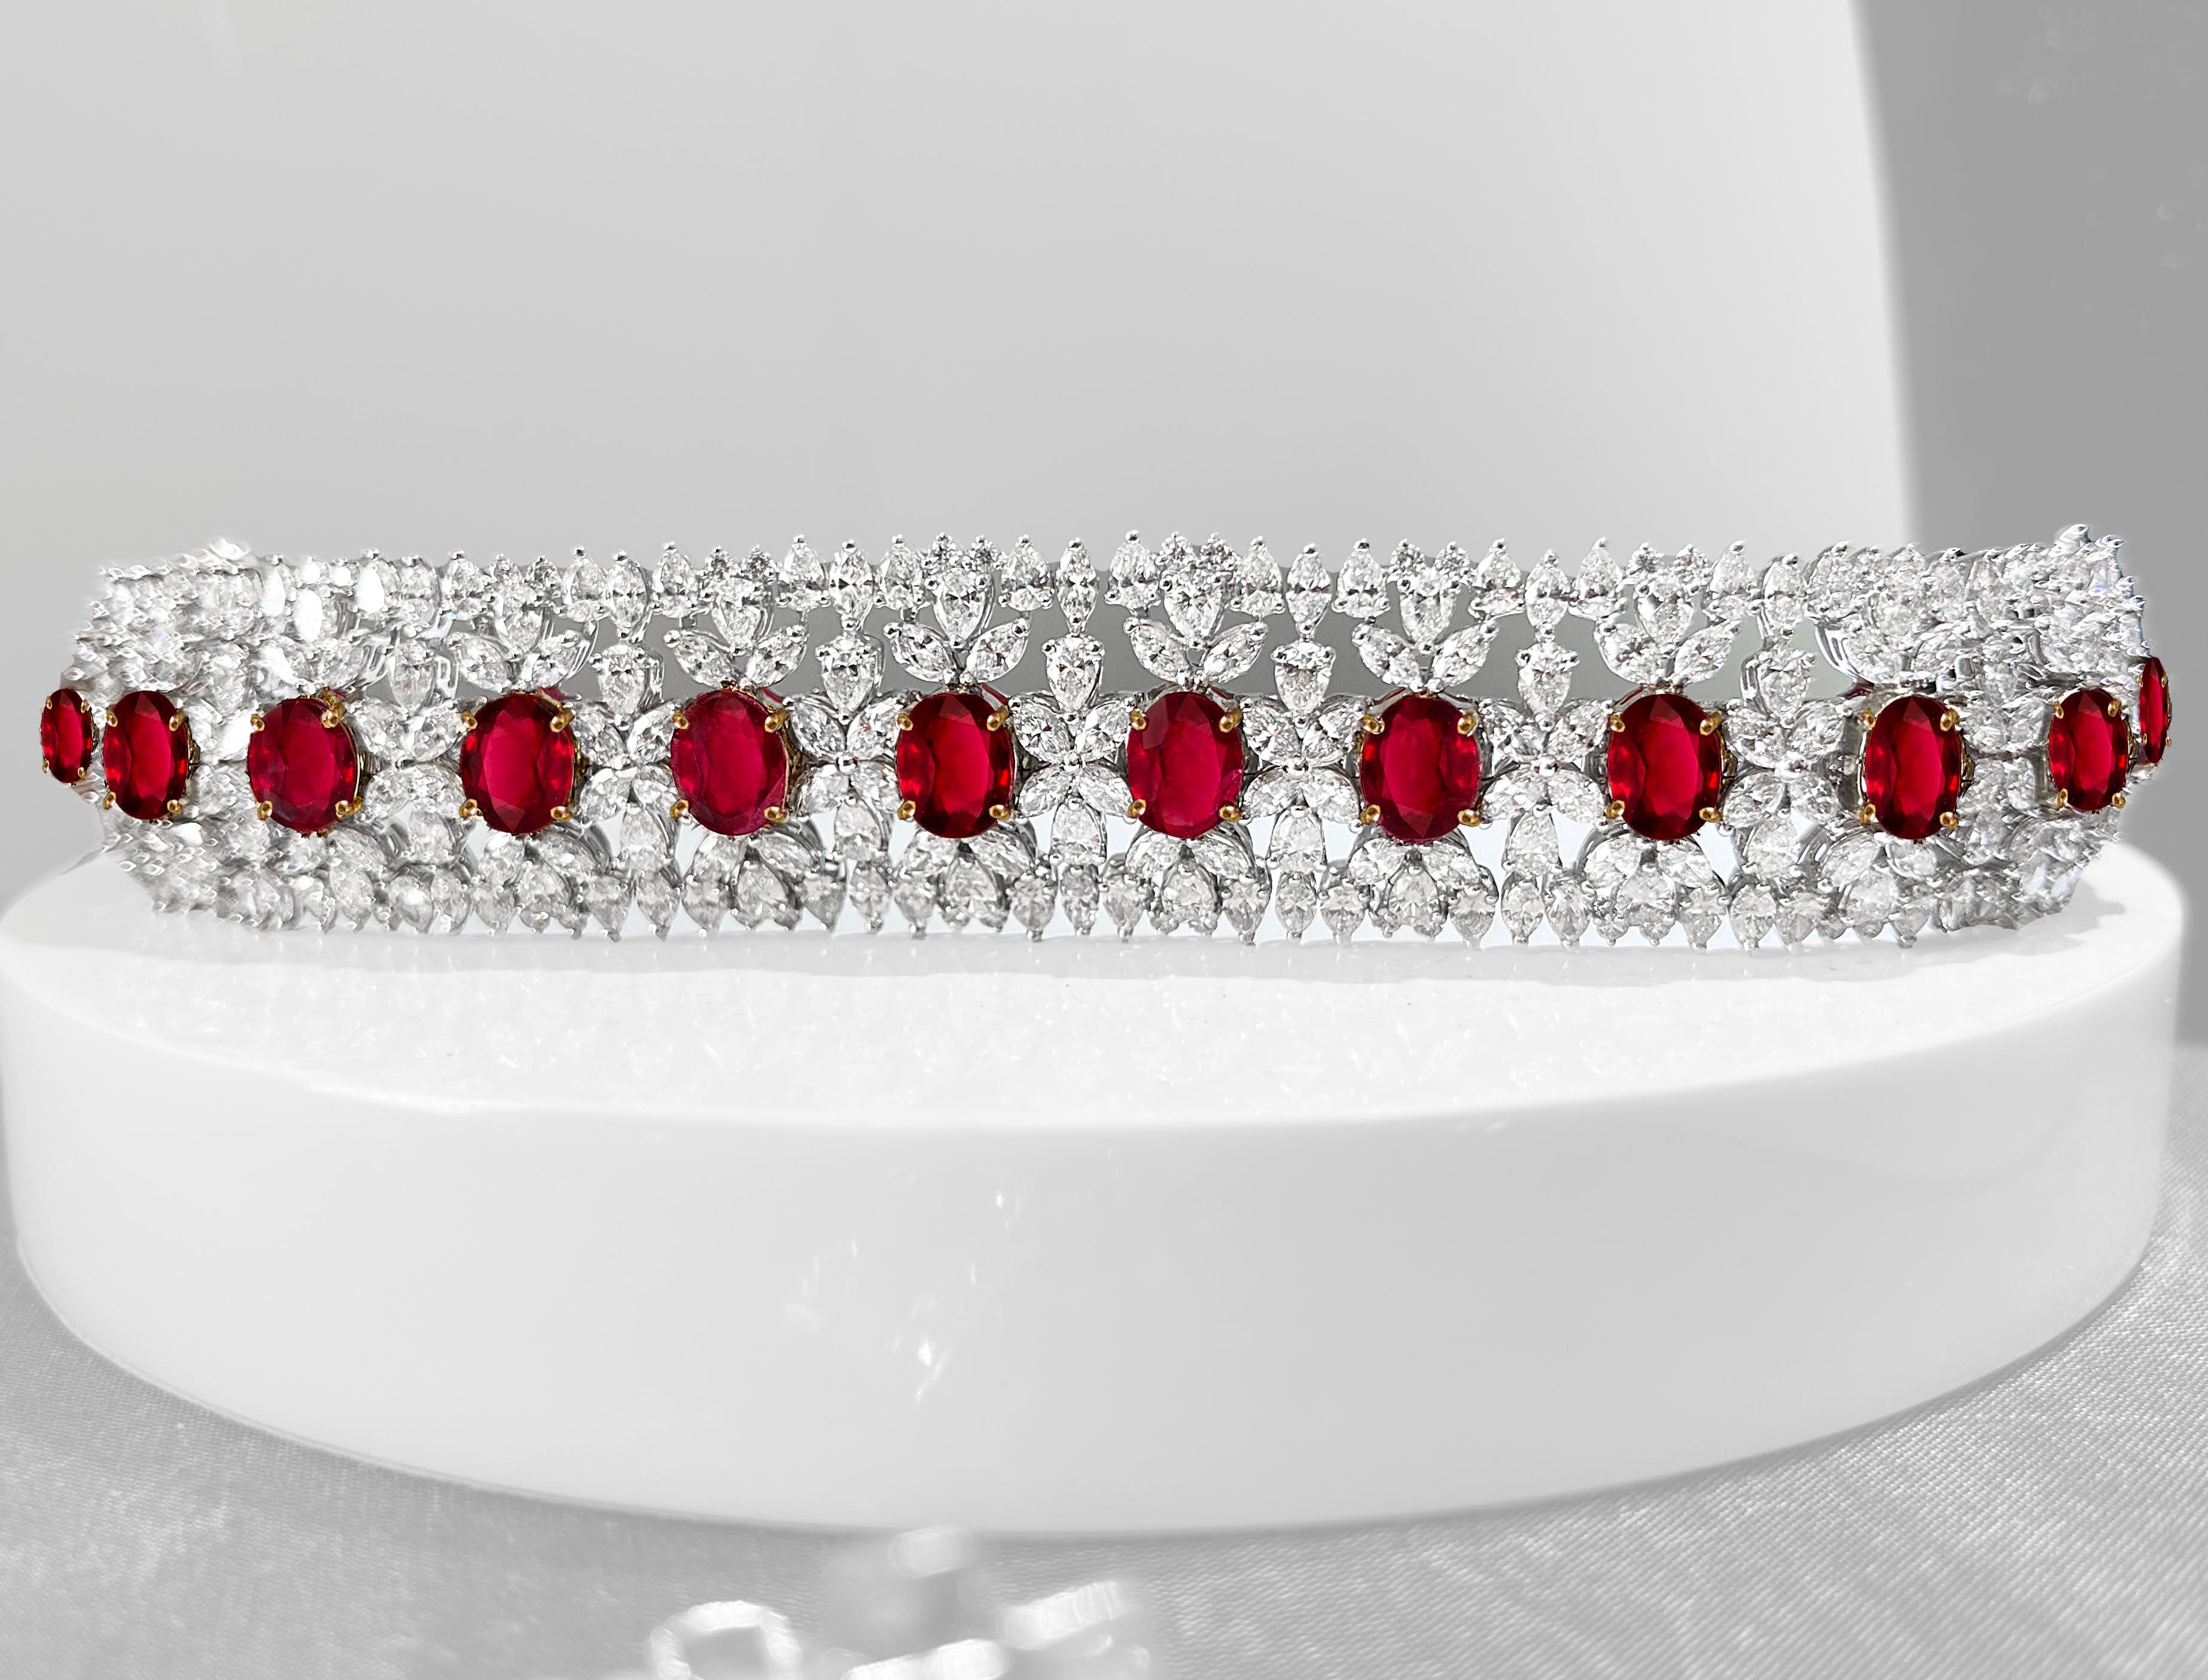 One-of-a-kind, AGL-certified, Burmese ruby and diamond wide tennis bracelet crafted in 18-karat white and 18-karat yellow gold.
The 13 oval-shaped Burma rubies are AGL-certified and measure in size from 10.00 x 7.70 x 3.16 mm to 8.32 x 6.82 x